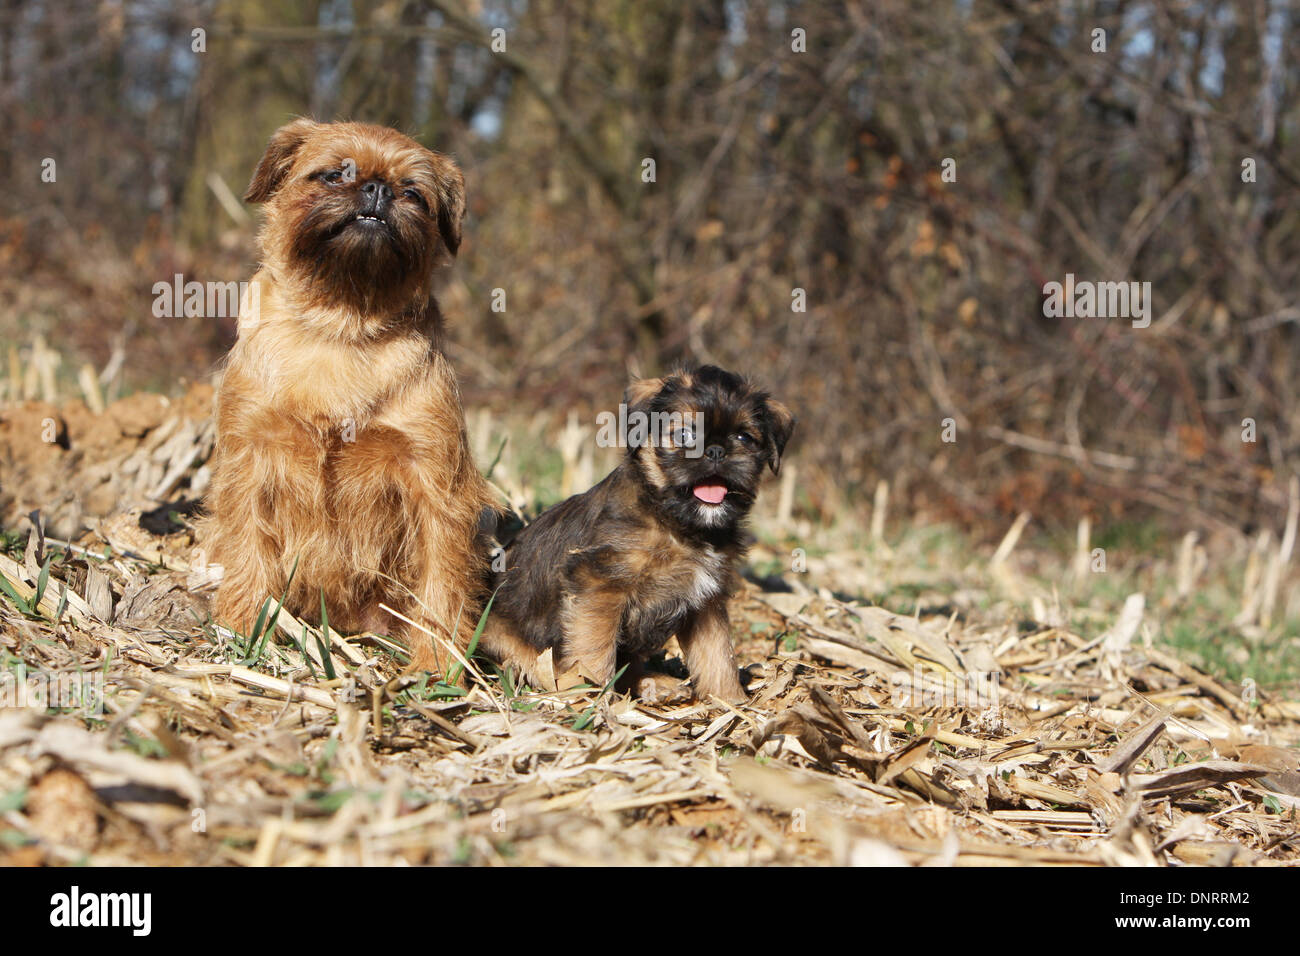 dog Brussels Griffon / Griffon Bruxellois  adult and puppy sitting in a field Stock Photo